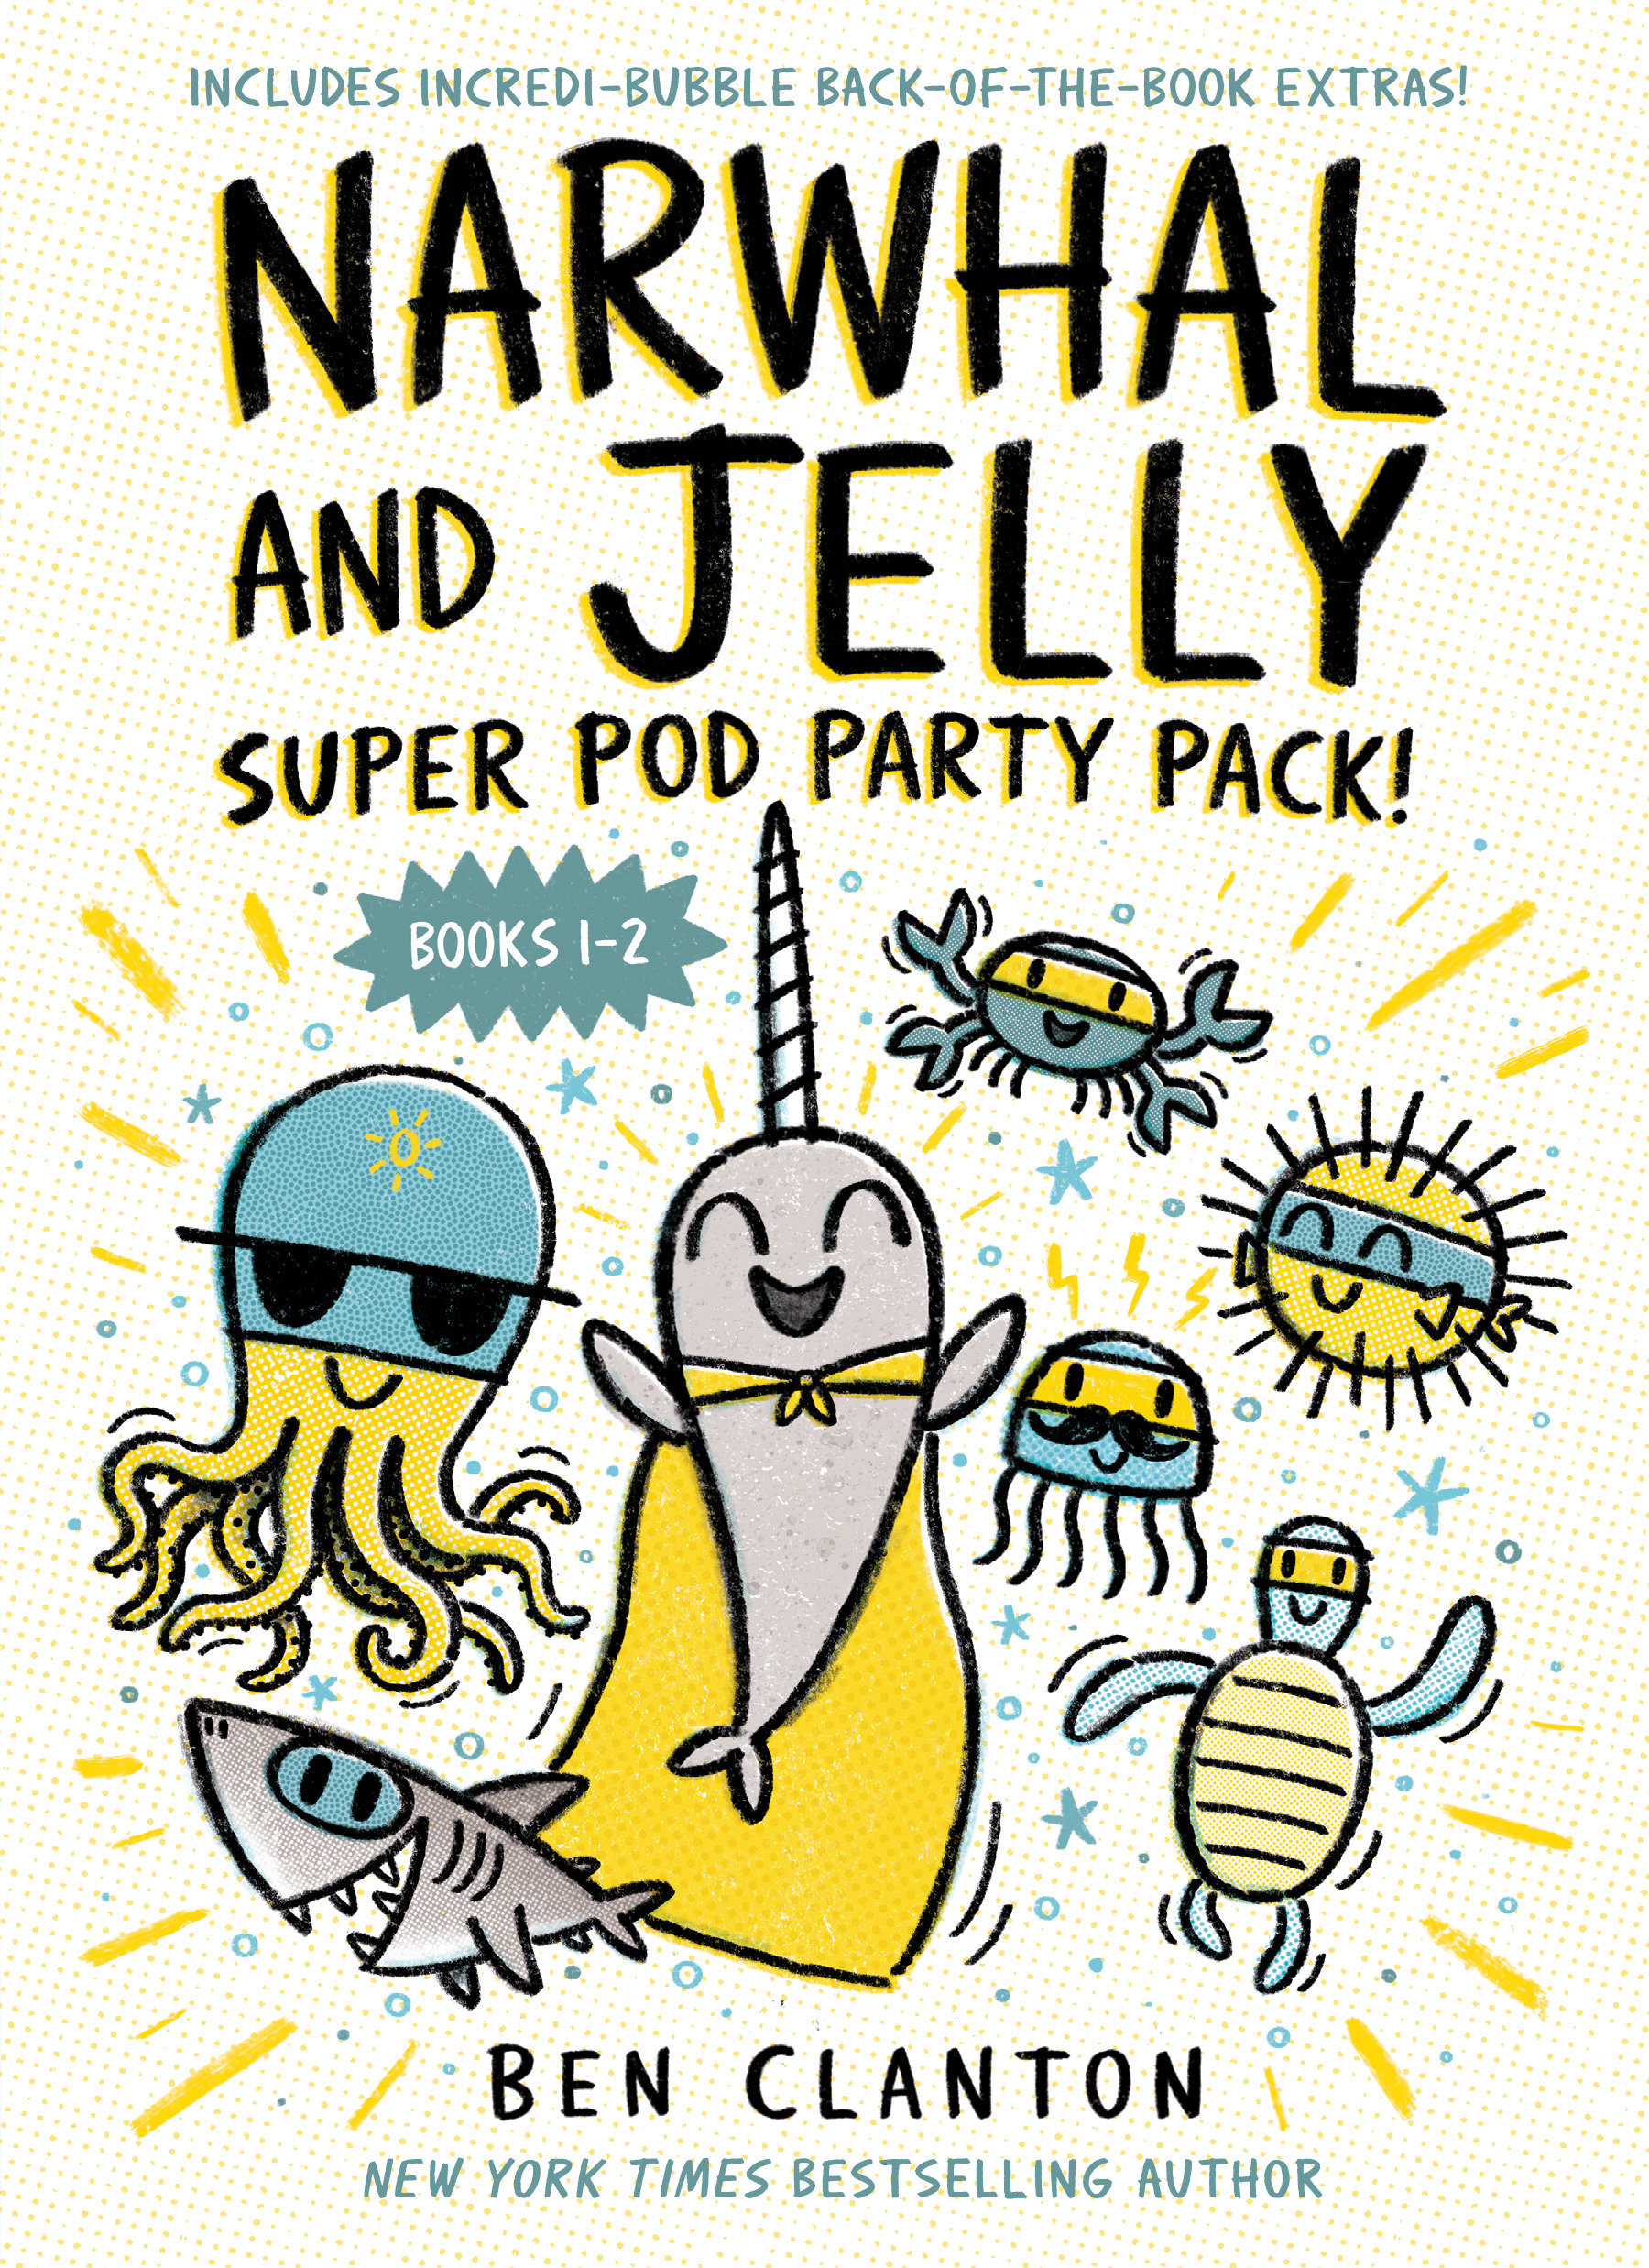 Narwhal and Jelly Boxed Set Super Pod Party Pack Volume 1 Books 1 & 2